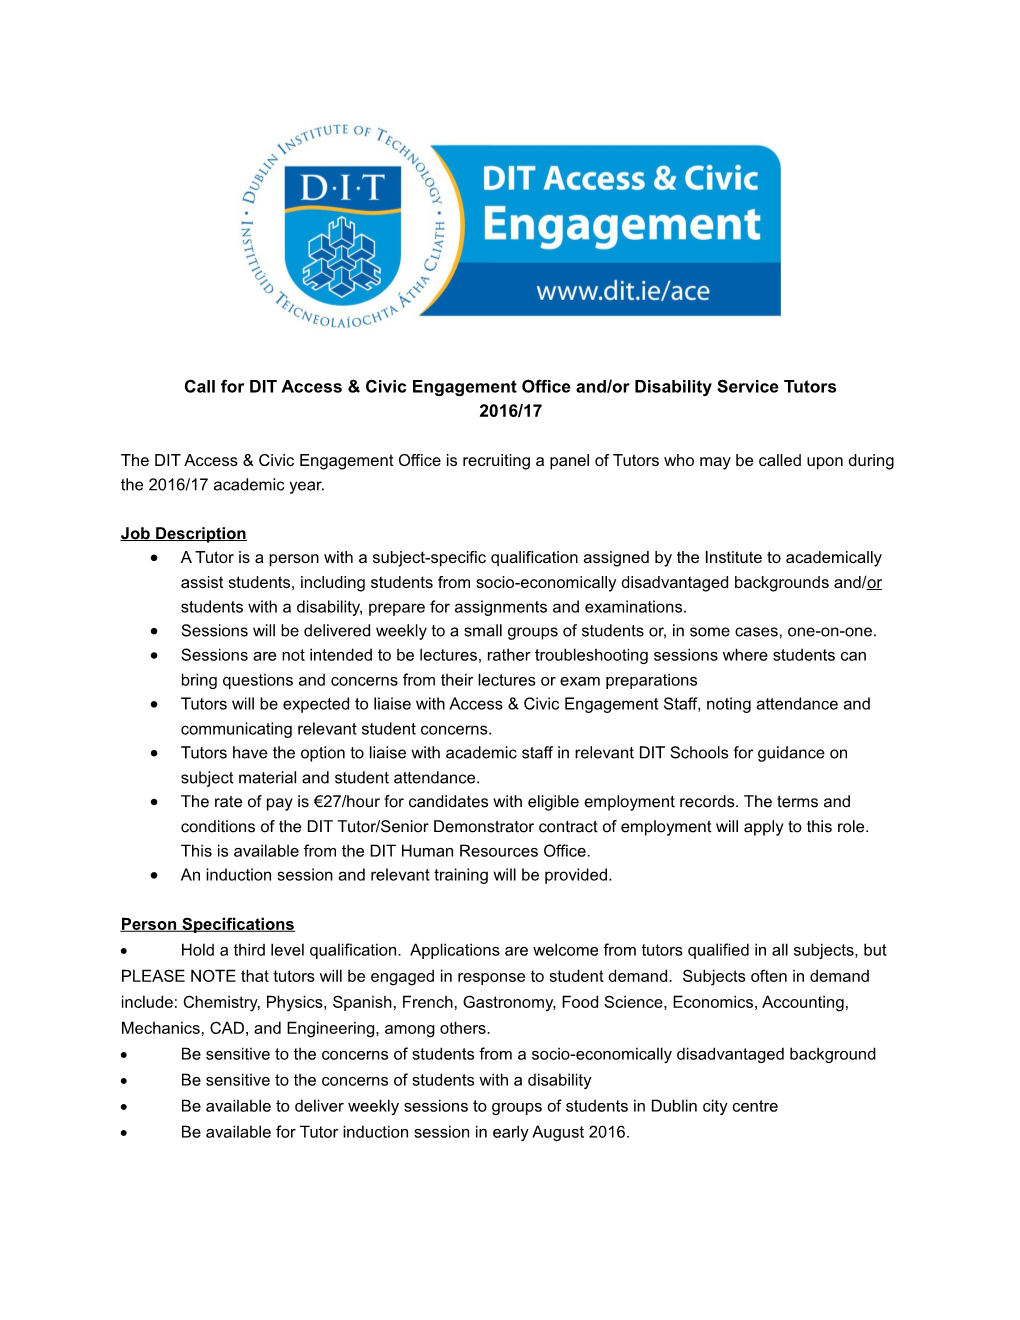 Call for DIT Access & Civic Engagement Office And/Or Disability Service Tutors